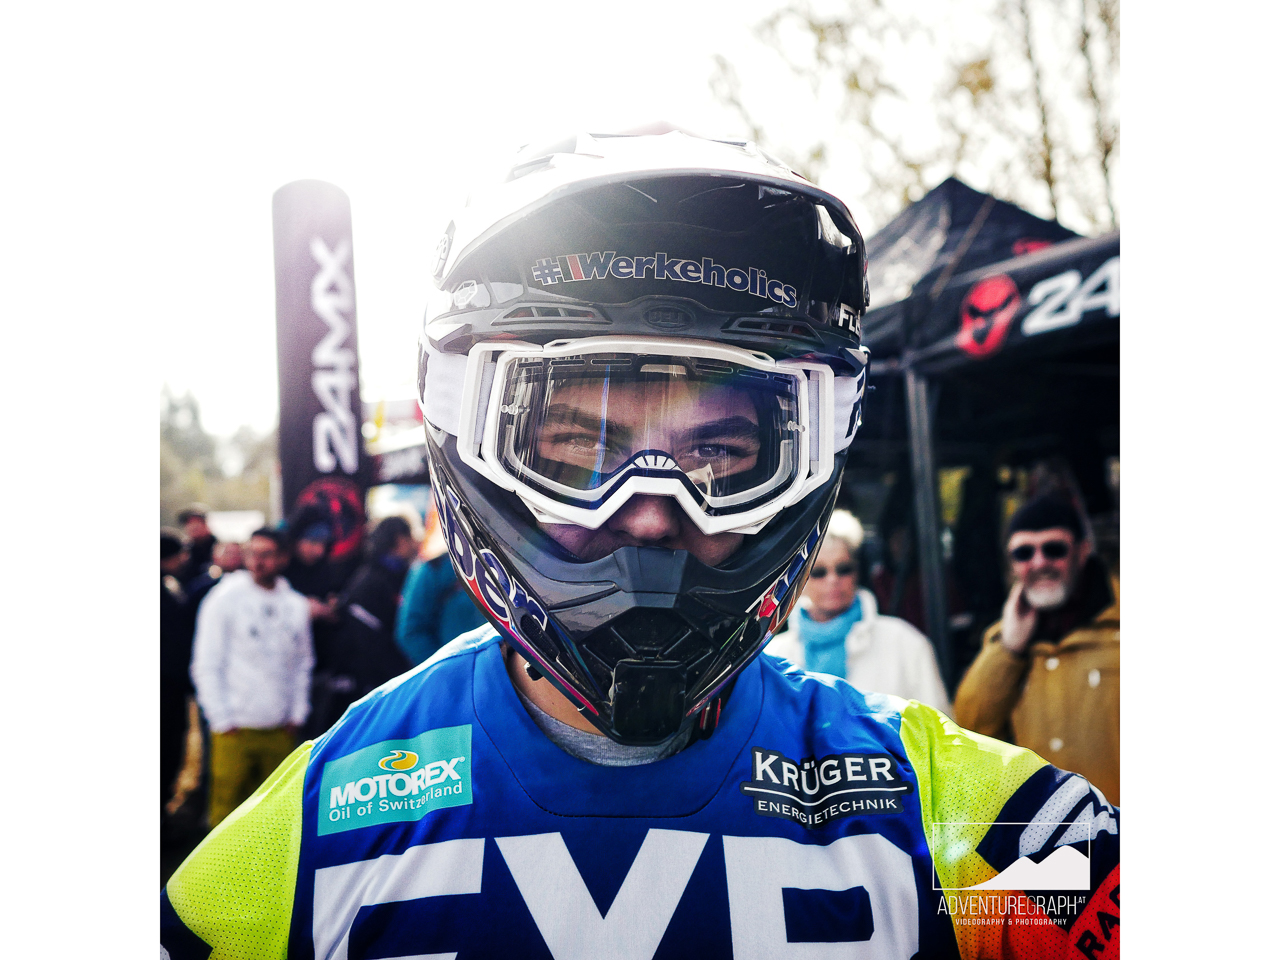 Motocross enduro racer Kevin Gallas with 24MX at WESS (event).